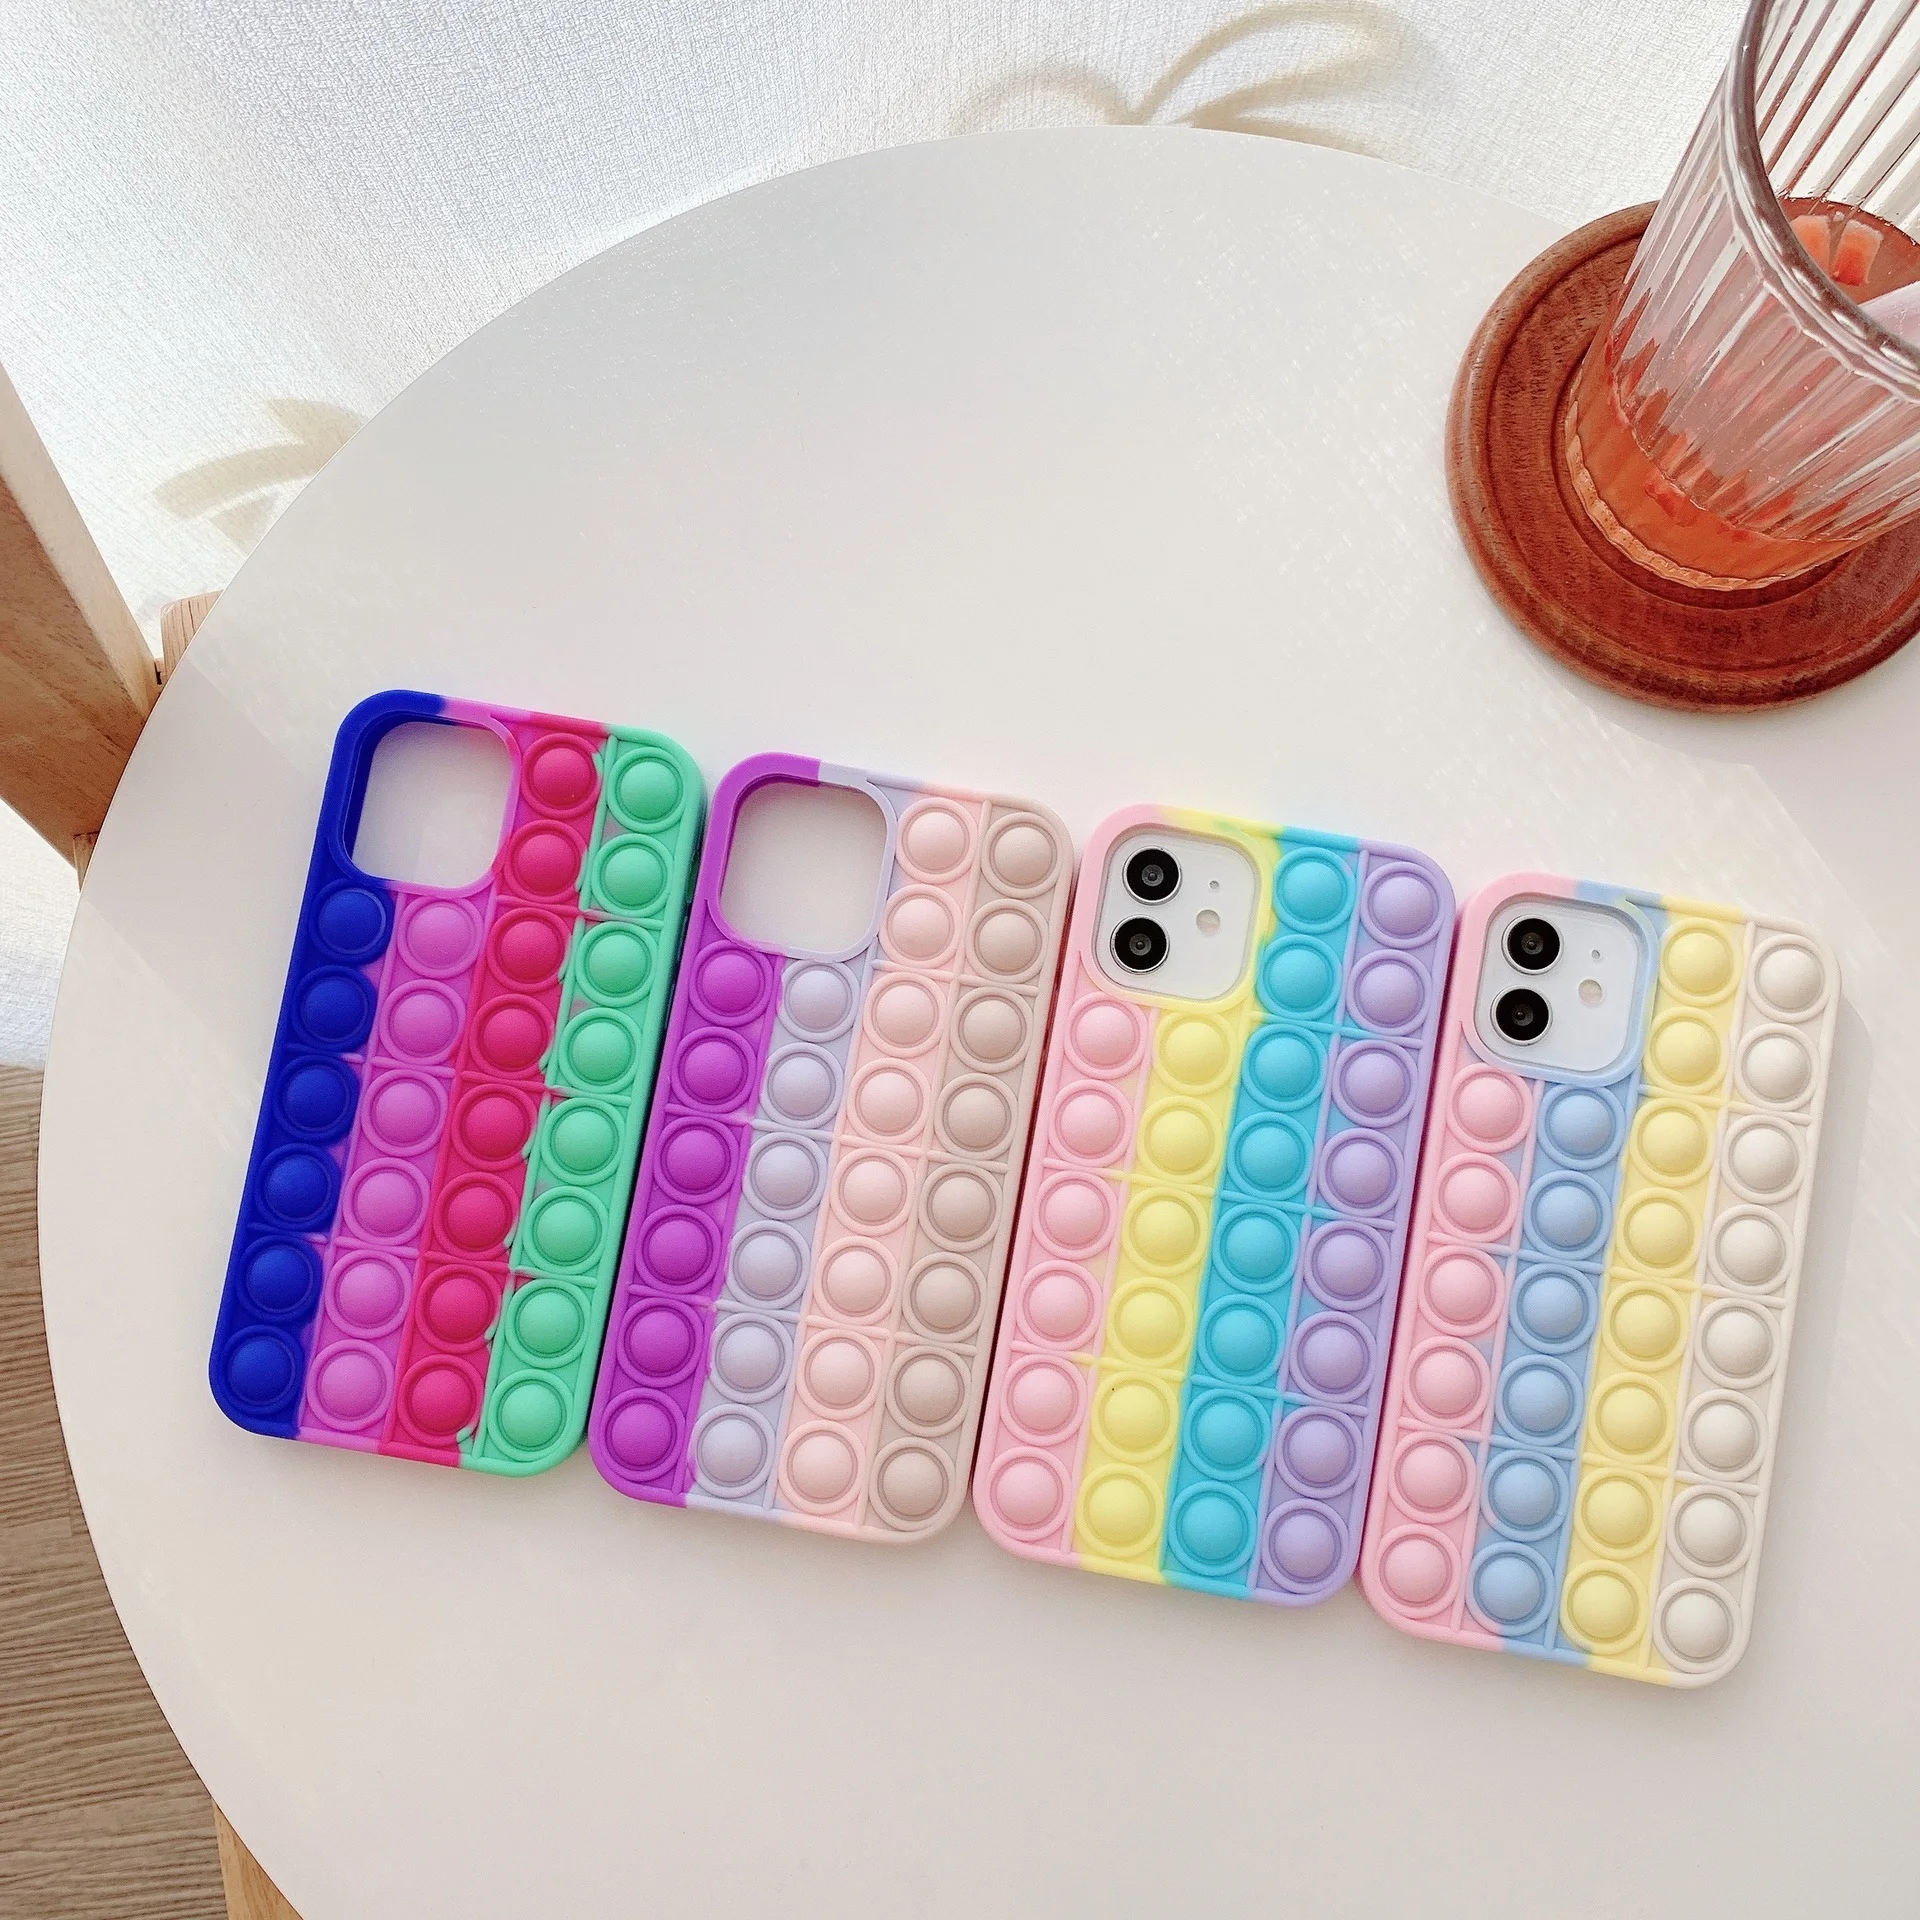 

3D Rainbow color silicon luxury relieve stress white black fidget popper cell phone cases for iphone 11 12 pro max phone, A variety of color